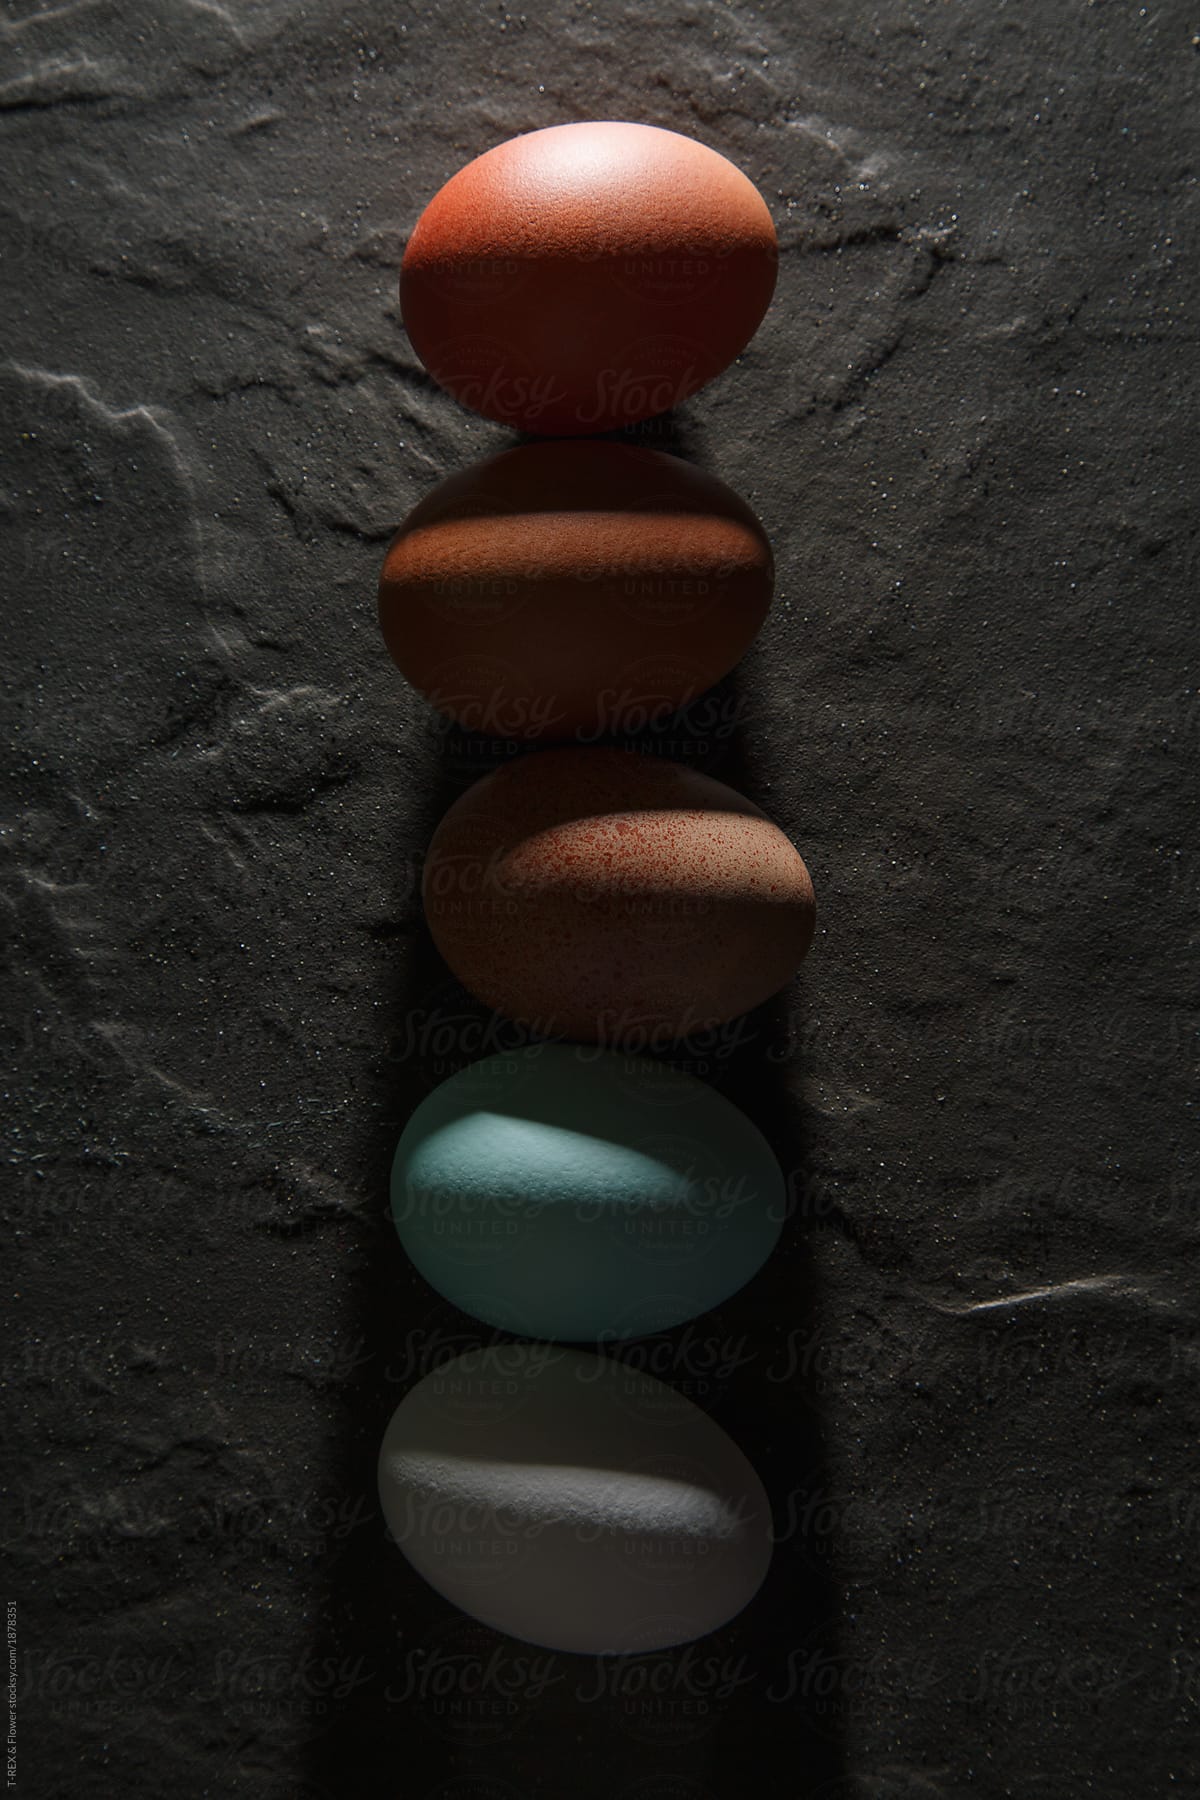 Painted eggs on rough background